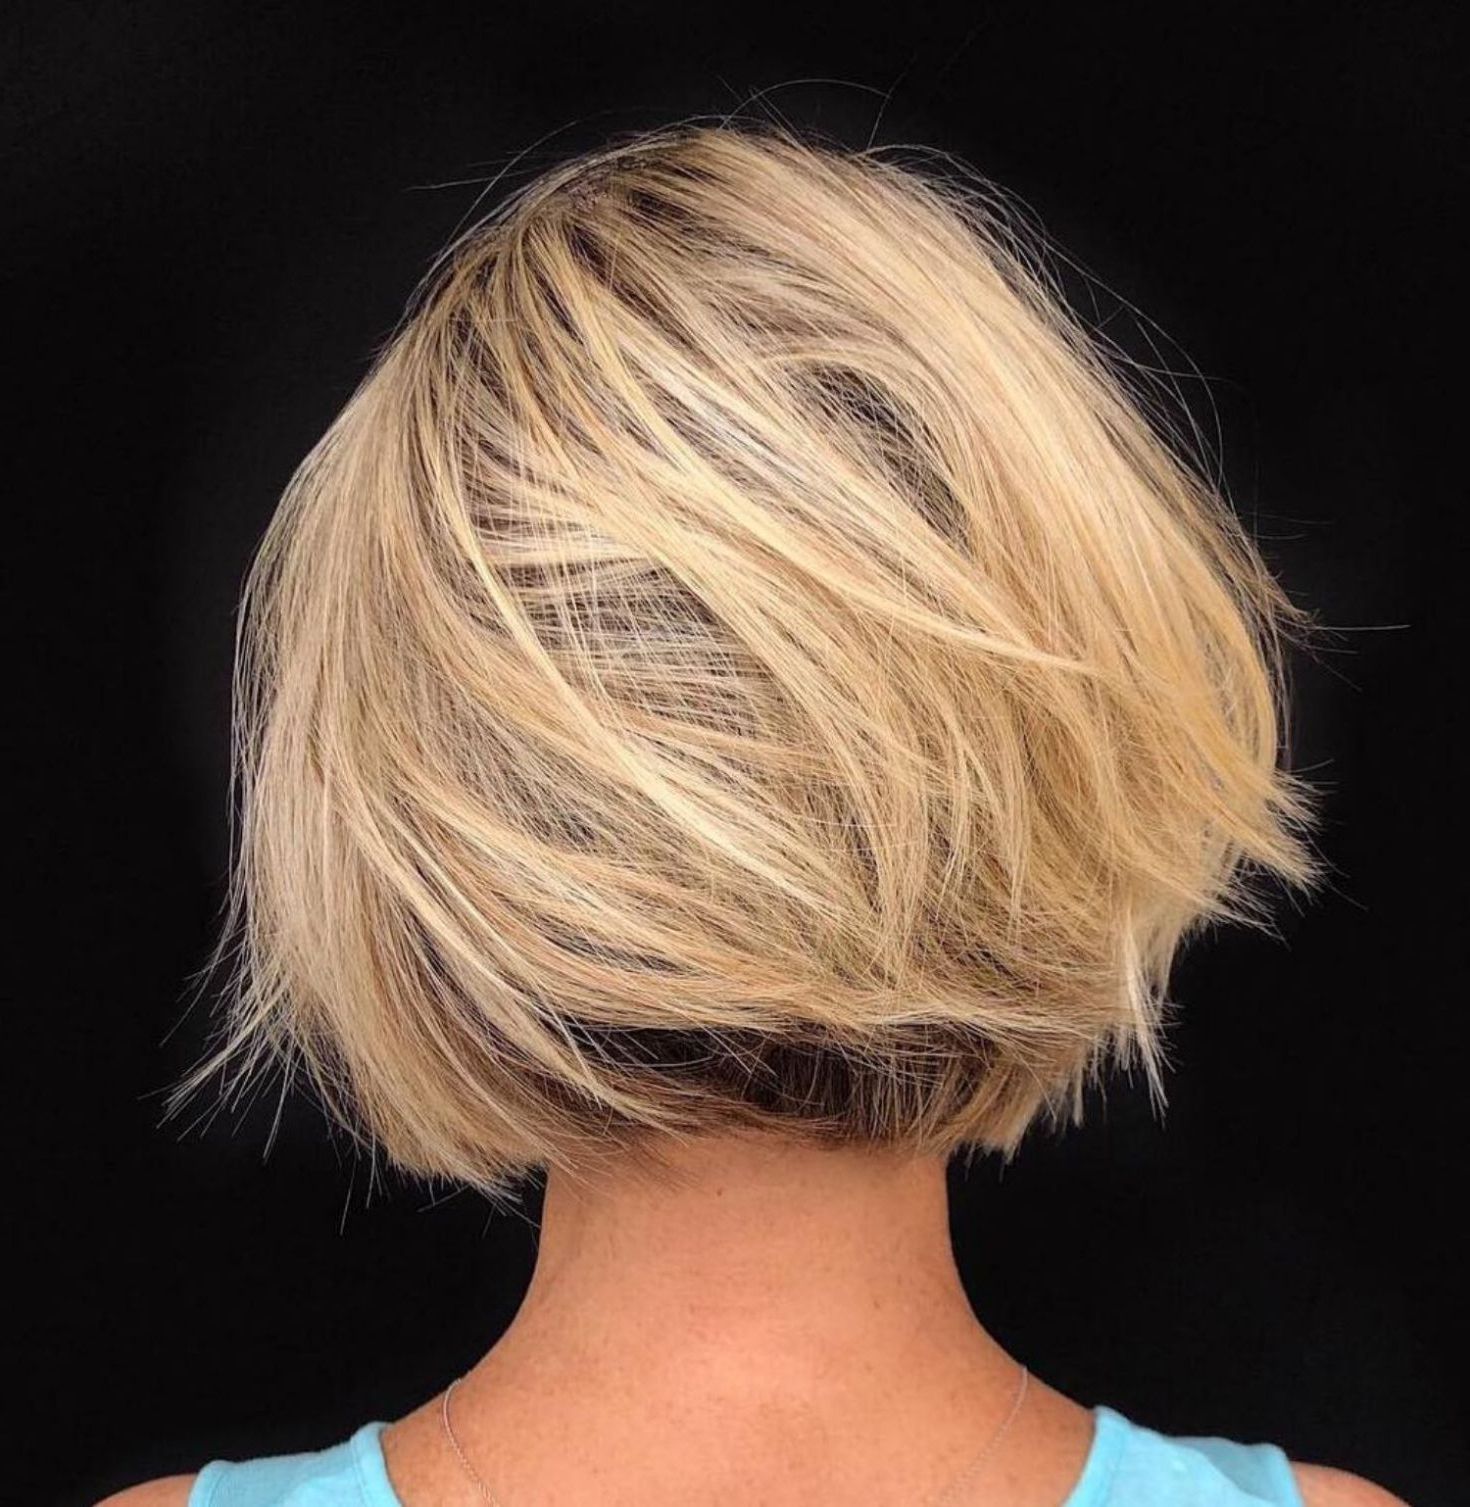 100 Mind Blowing Short Hairstyles For Fine Hair | Hairy | Pinterest With Dynamic Tousled Blonde Bob Hairstyles With Dark Underlayer (View 1 of 20)